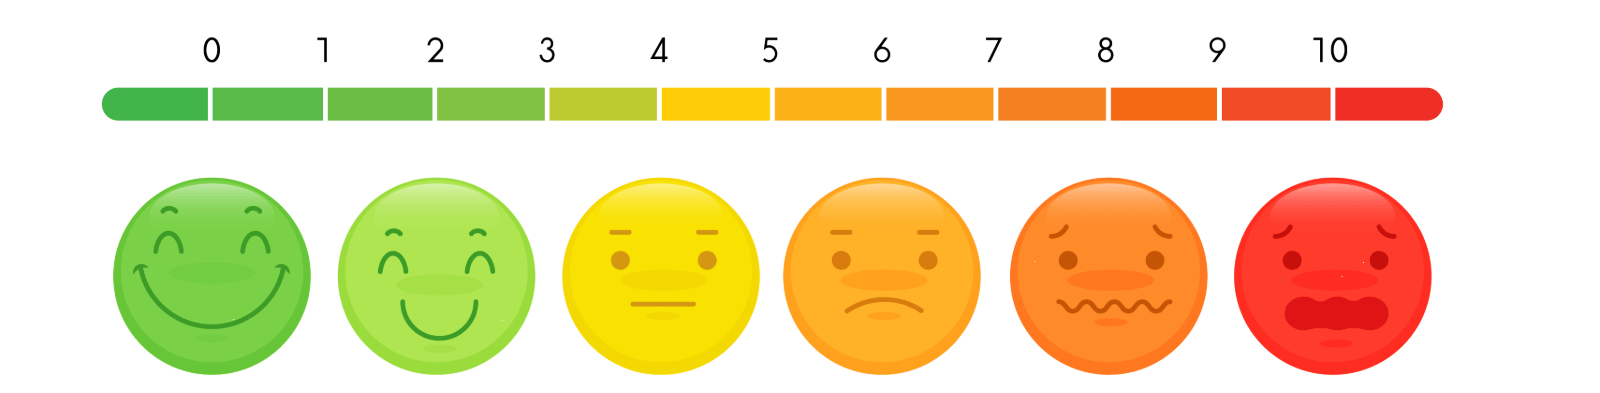 Rate Your Panic Attacks With This Severity Scale